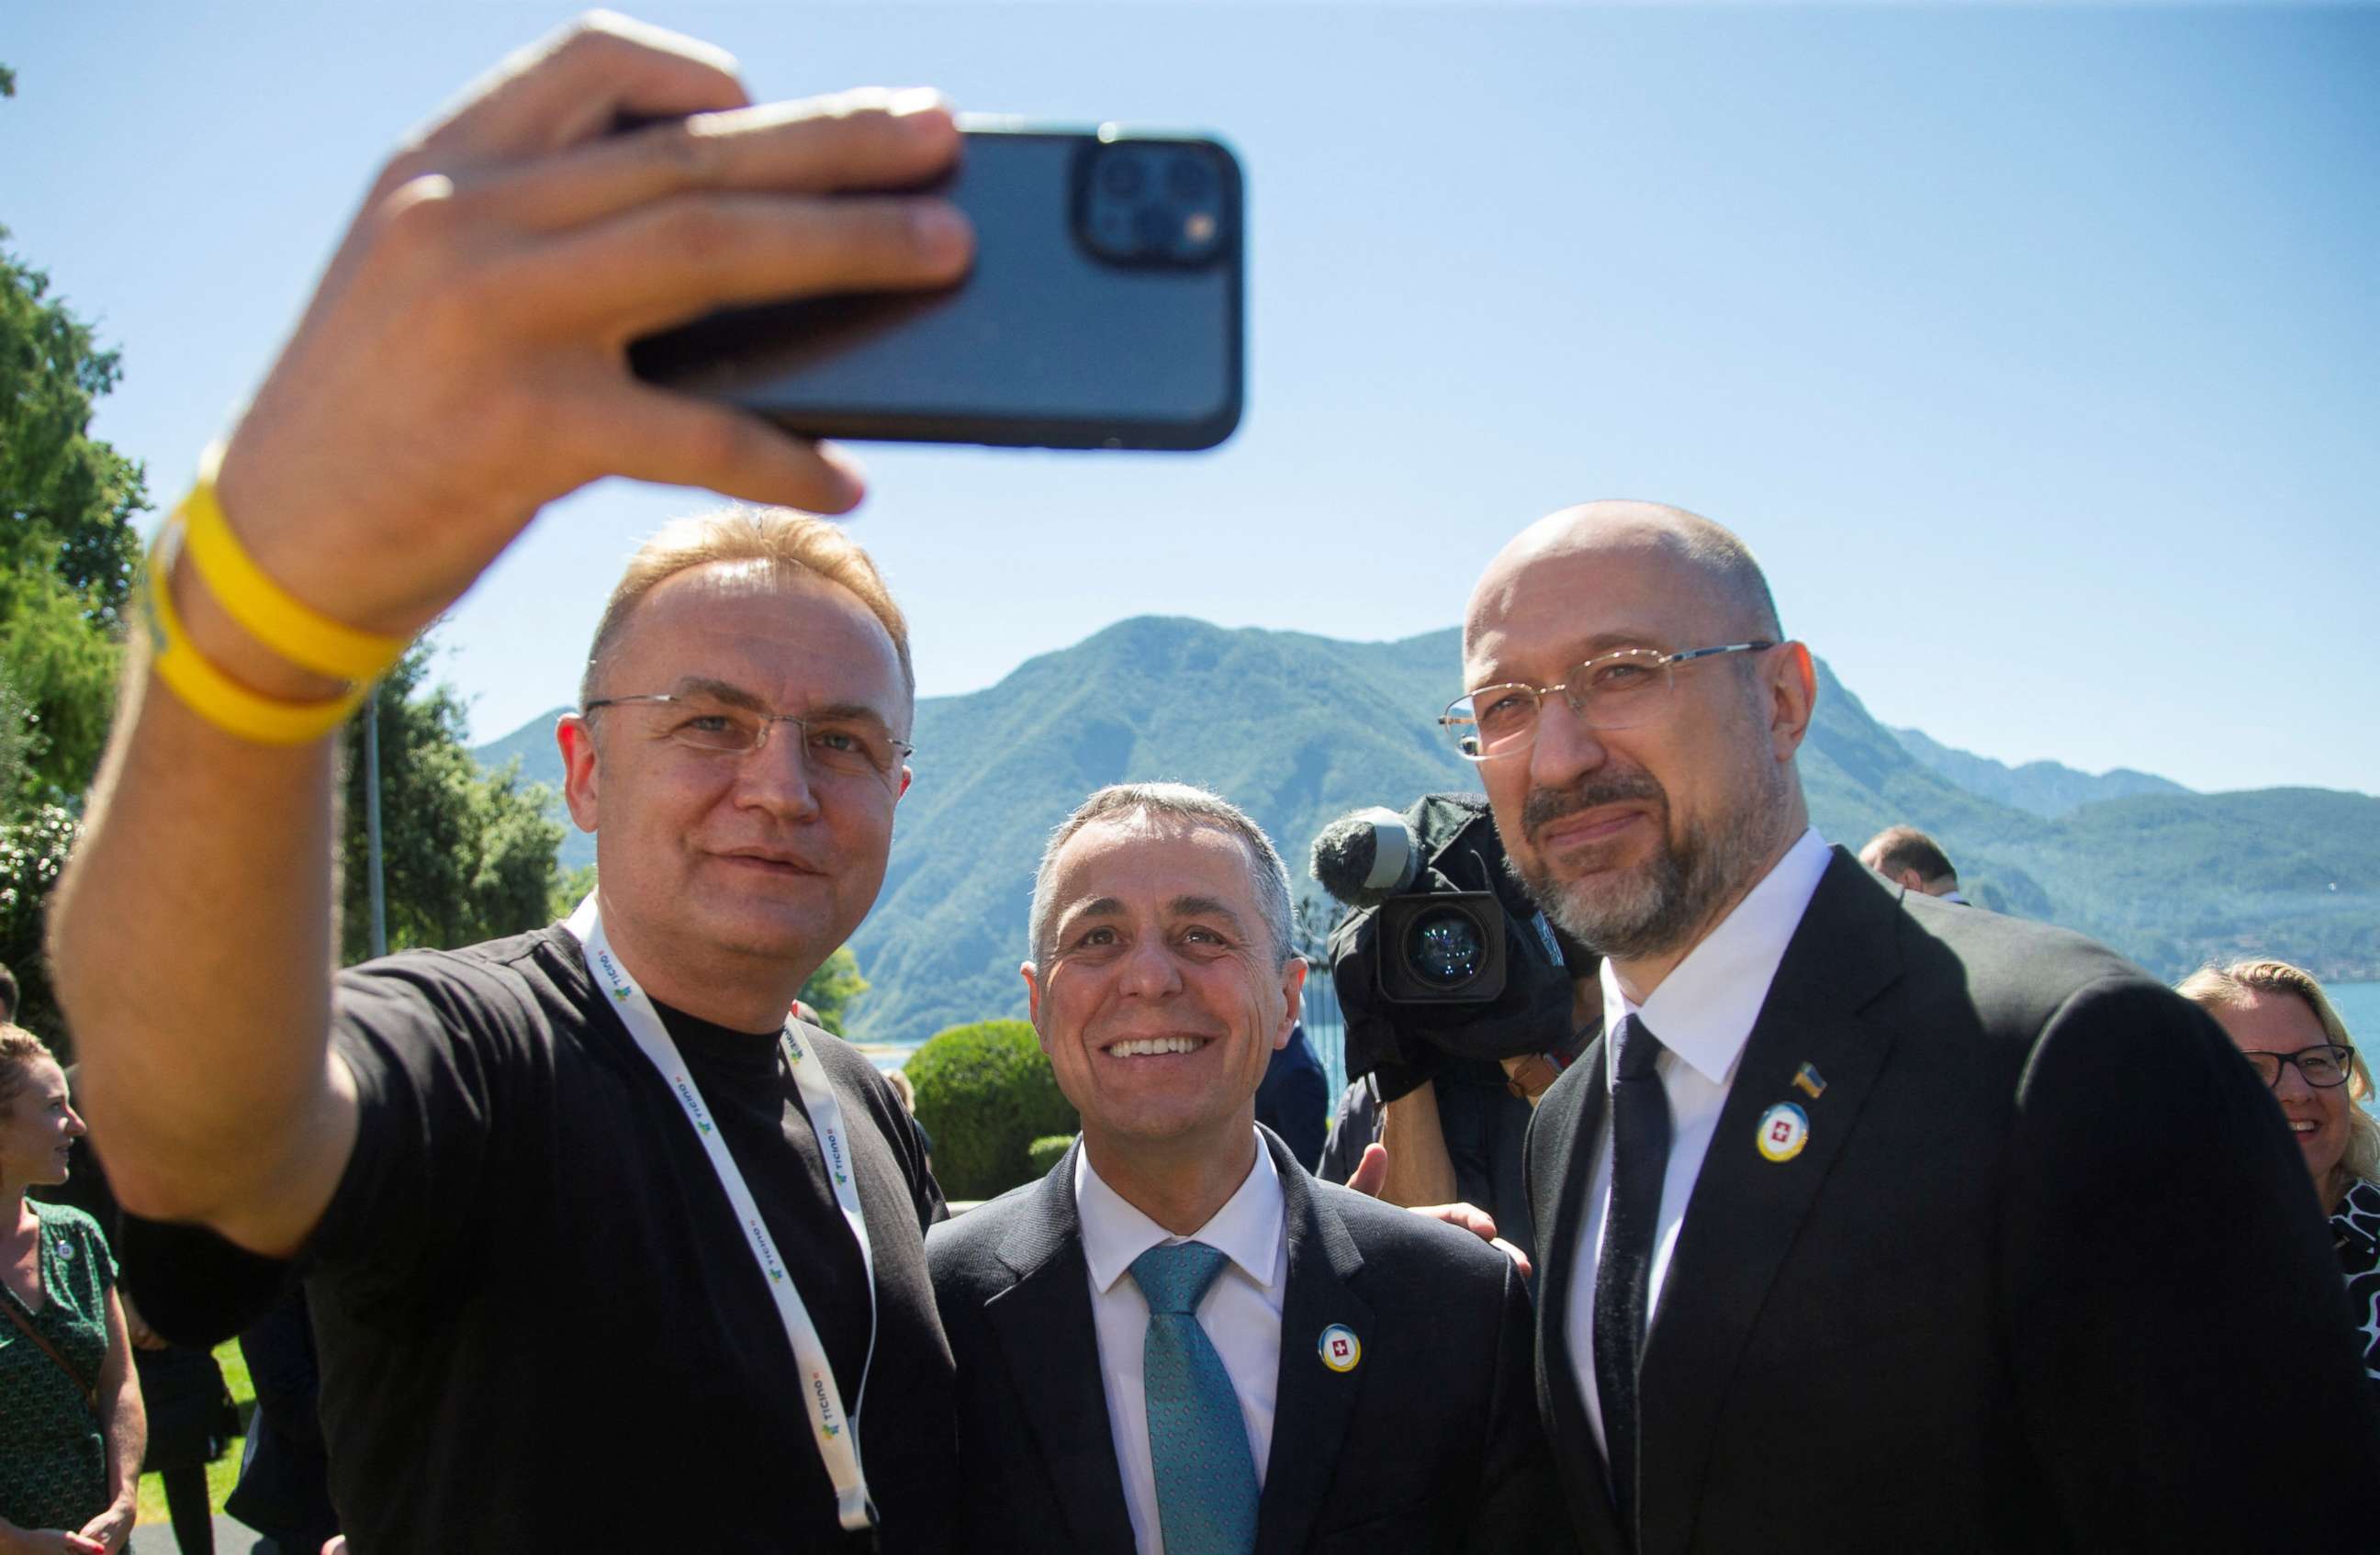 PHOTO: Andriy Sadovyi, Mayor of Lviv, left, poses with Swiss President Ignazio Cassis, Minister of Foreign Affairs, center, and Ukrainian Prime Minister Denys Shmyhal, in Lugano, Switzerland, on July 5, 2022.